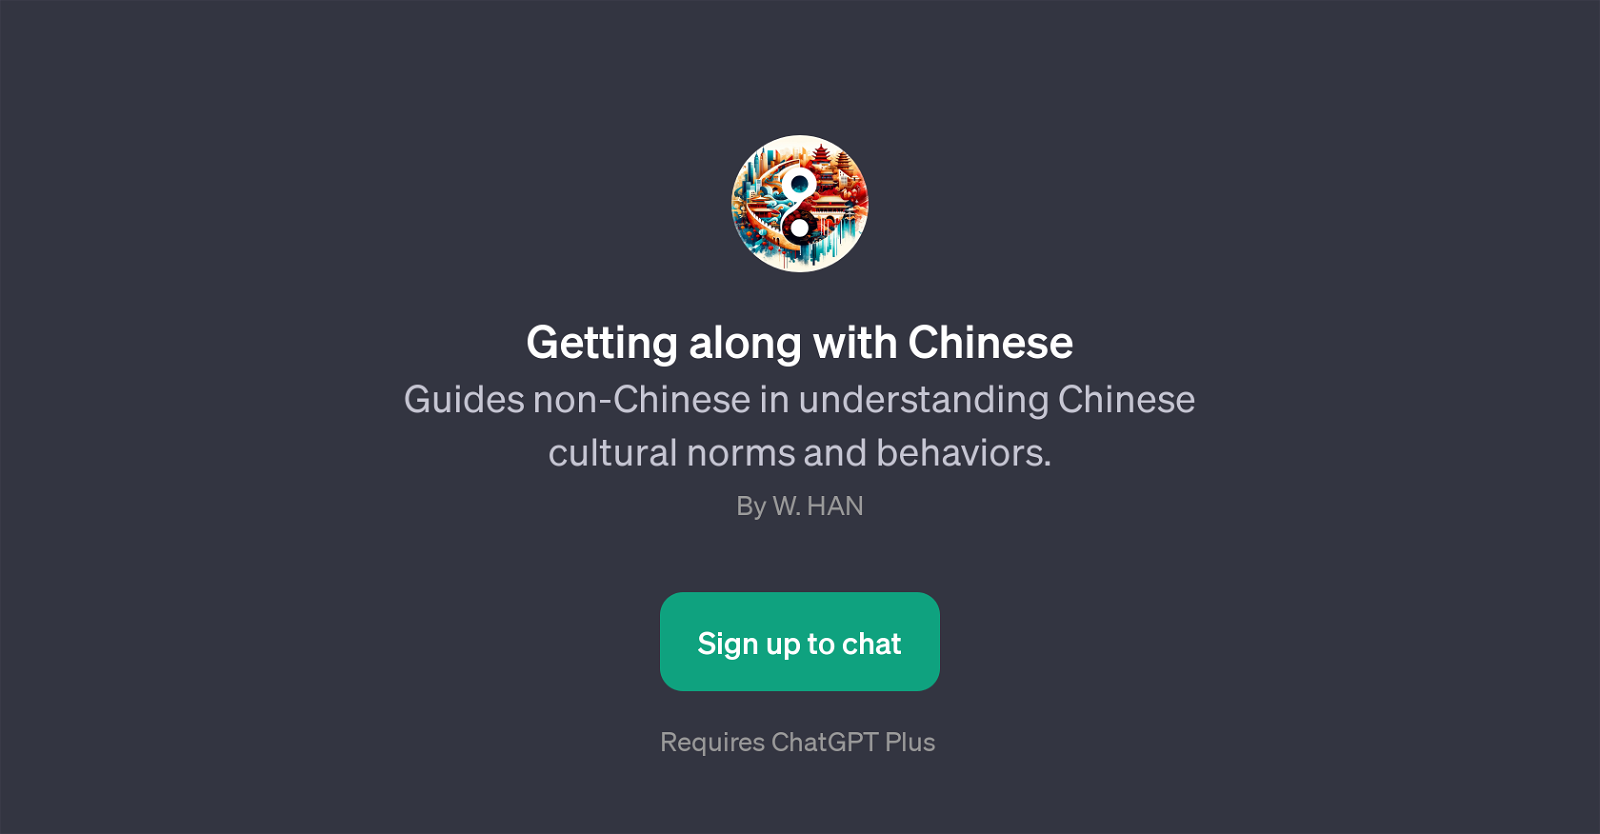 Getting along with Chinese website